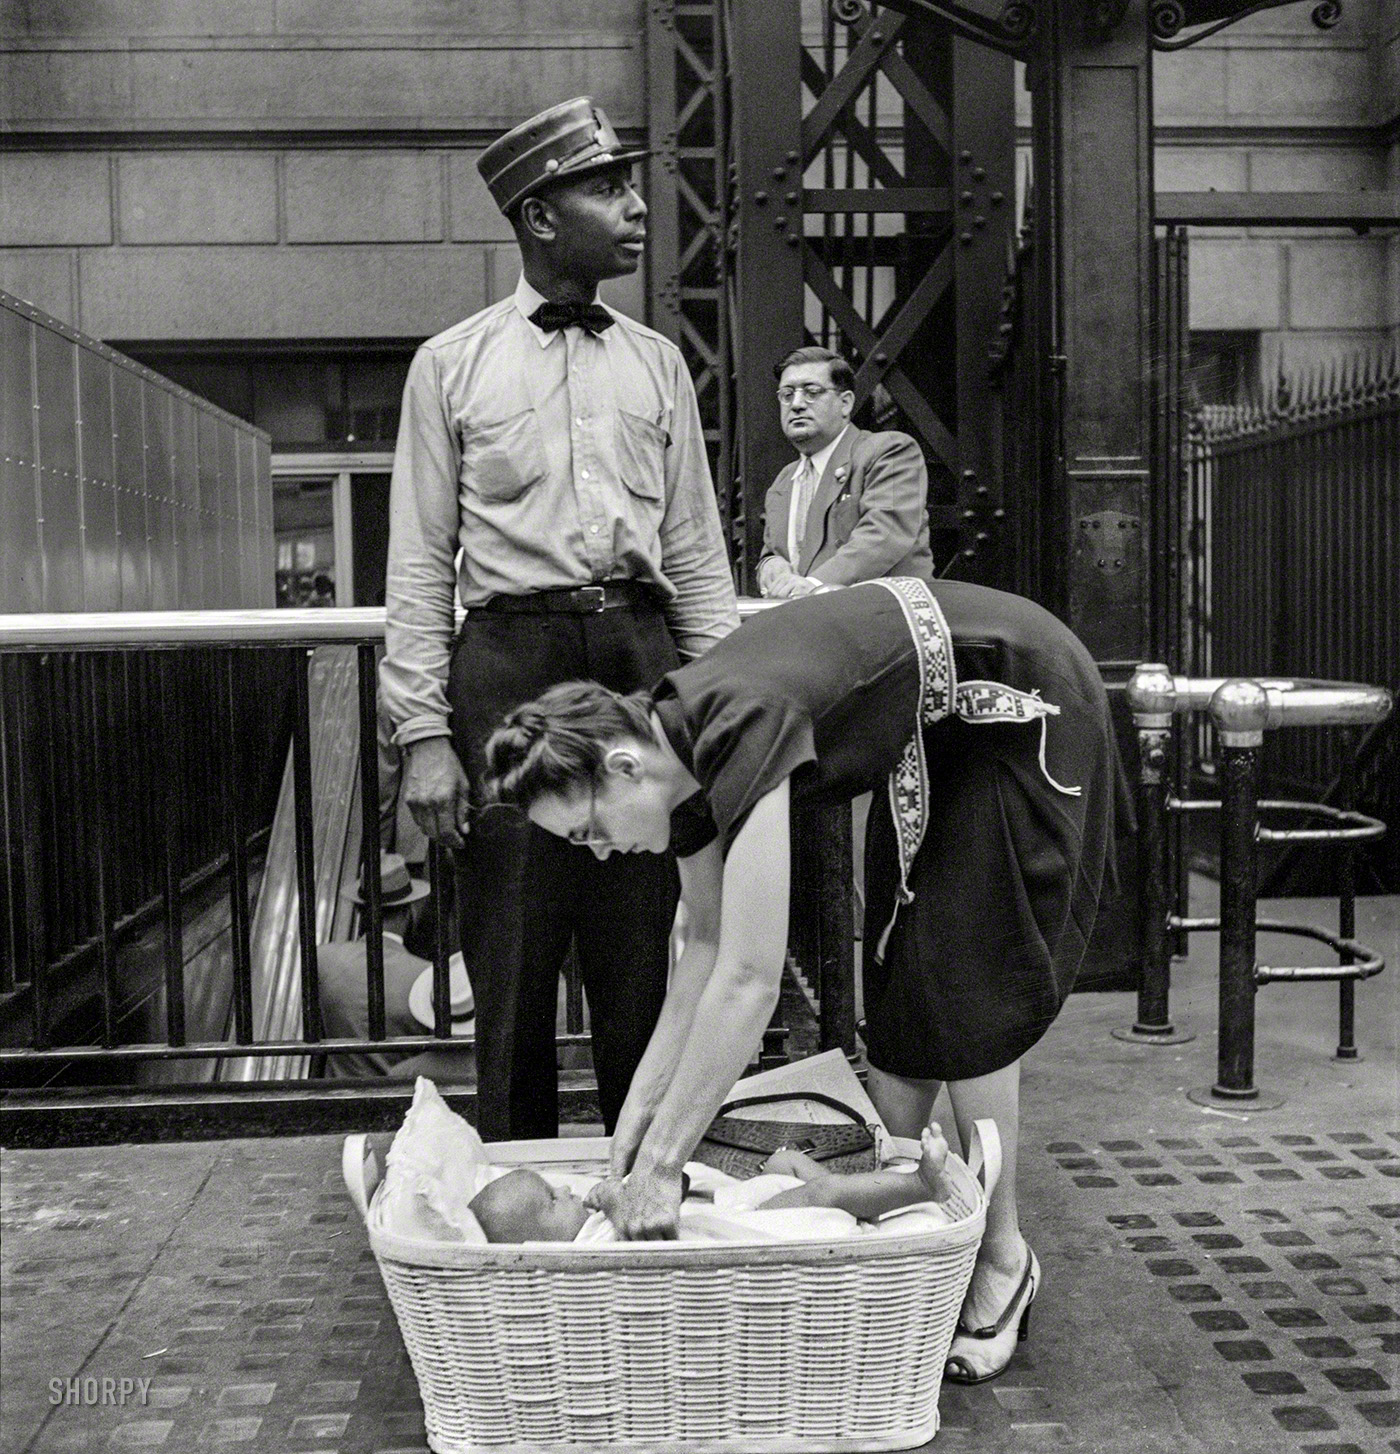 August 1942. "New York, New York. Waiting for trains at Pennsylvania Station." Photo by Marjory Collins for the Office of War Information. View full size.